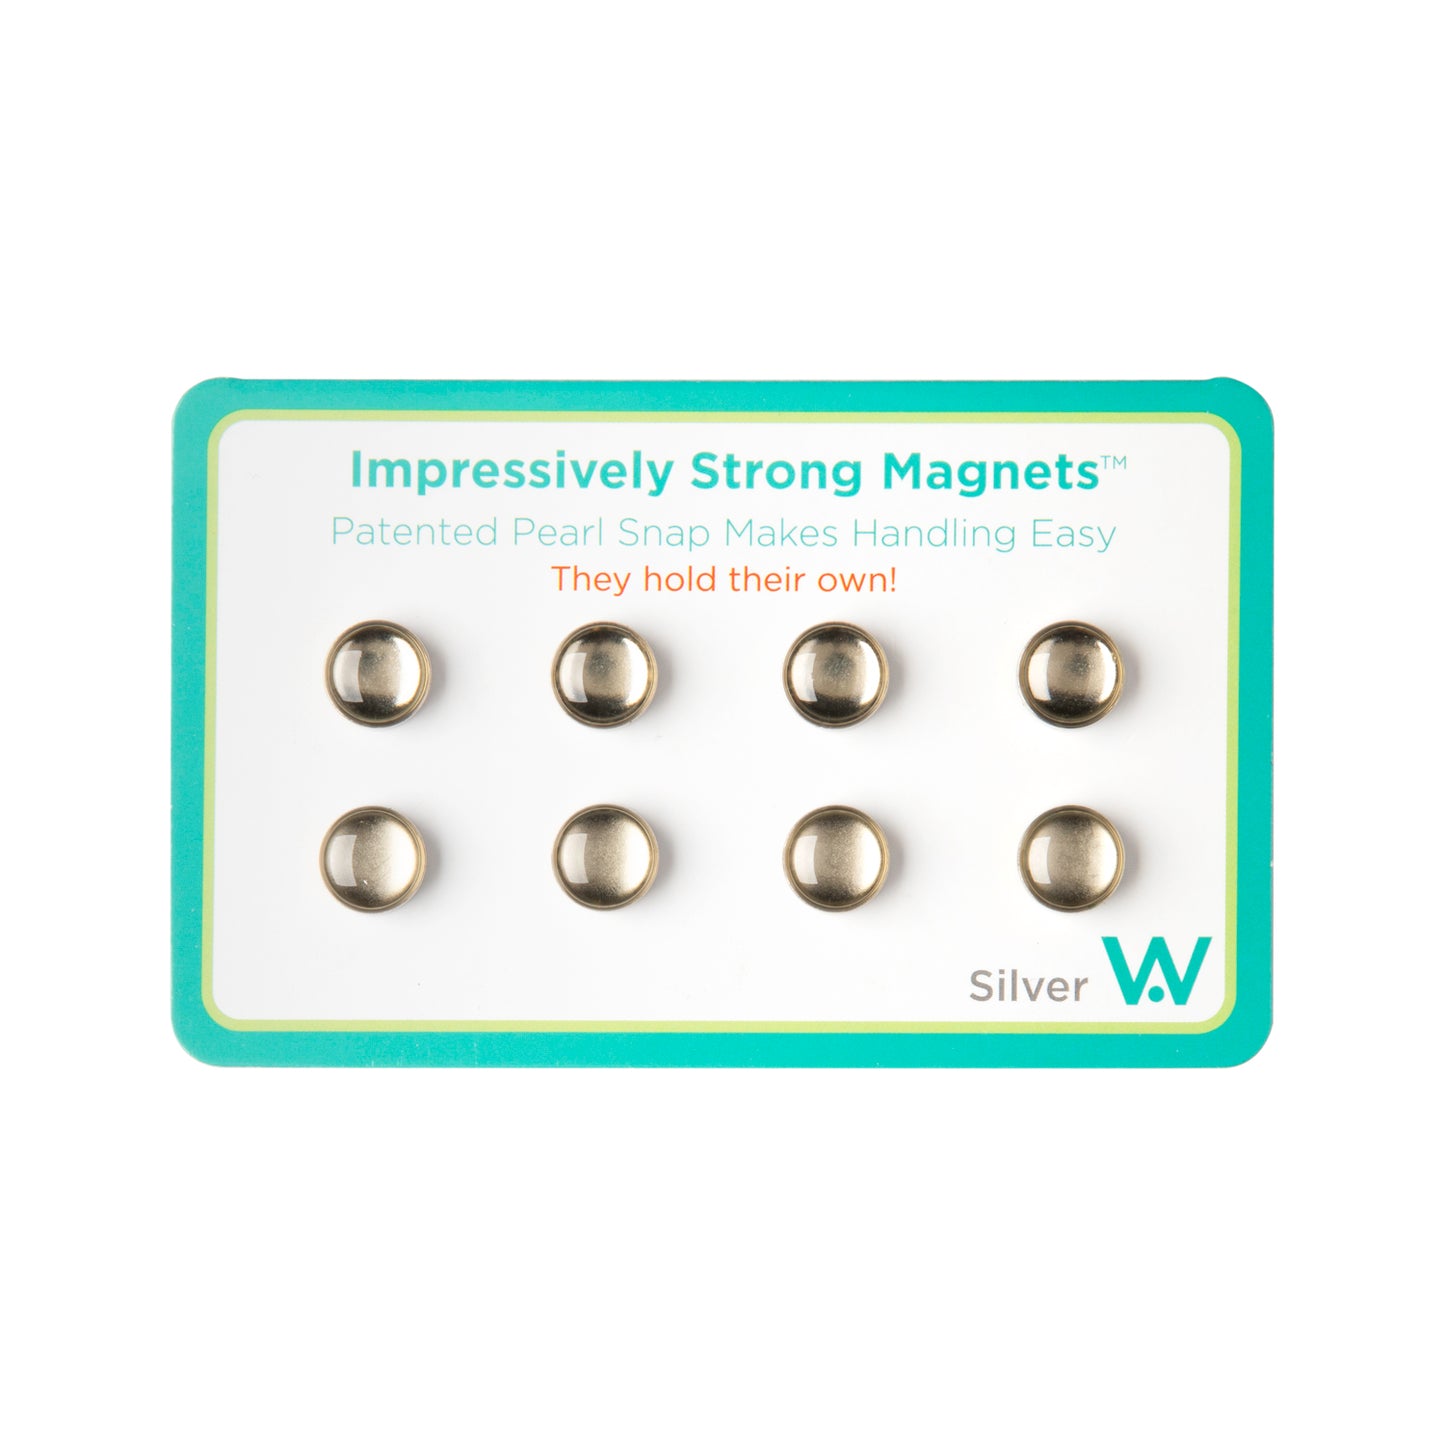 Case Pack of 20 Units of 099 Impressively Strong Magnets Set of 8 (C099)